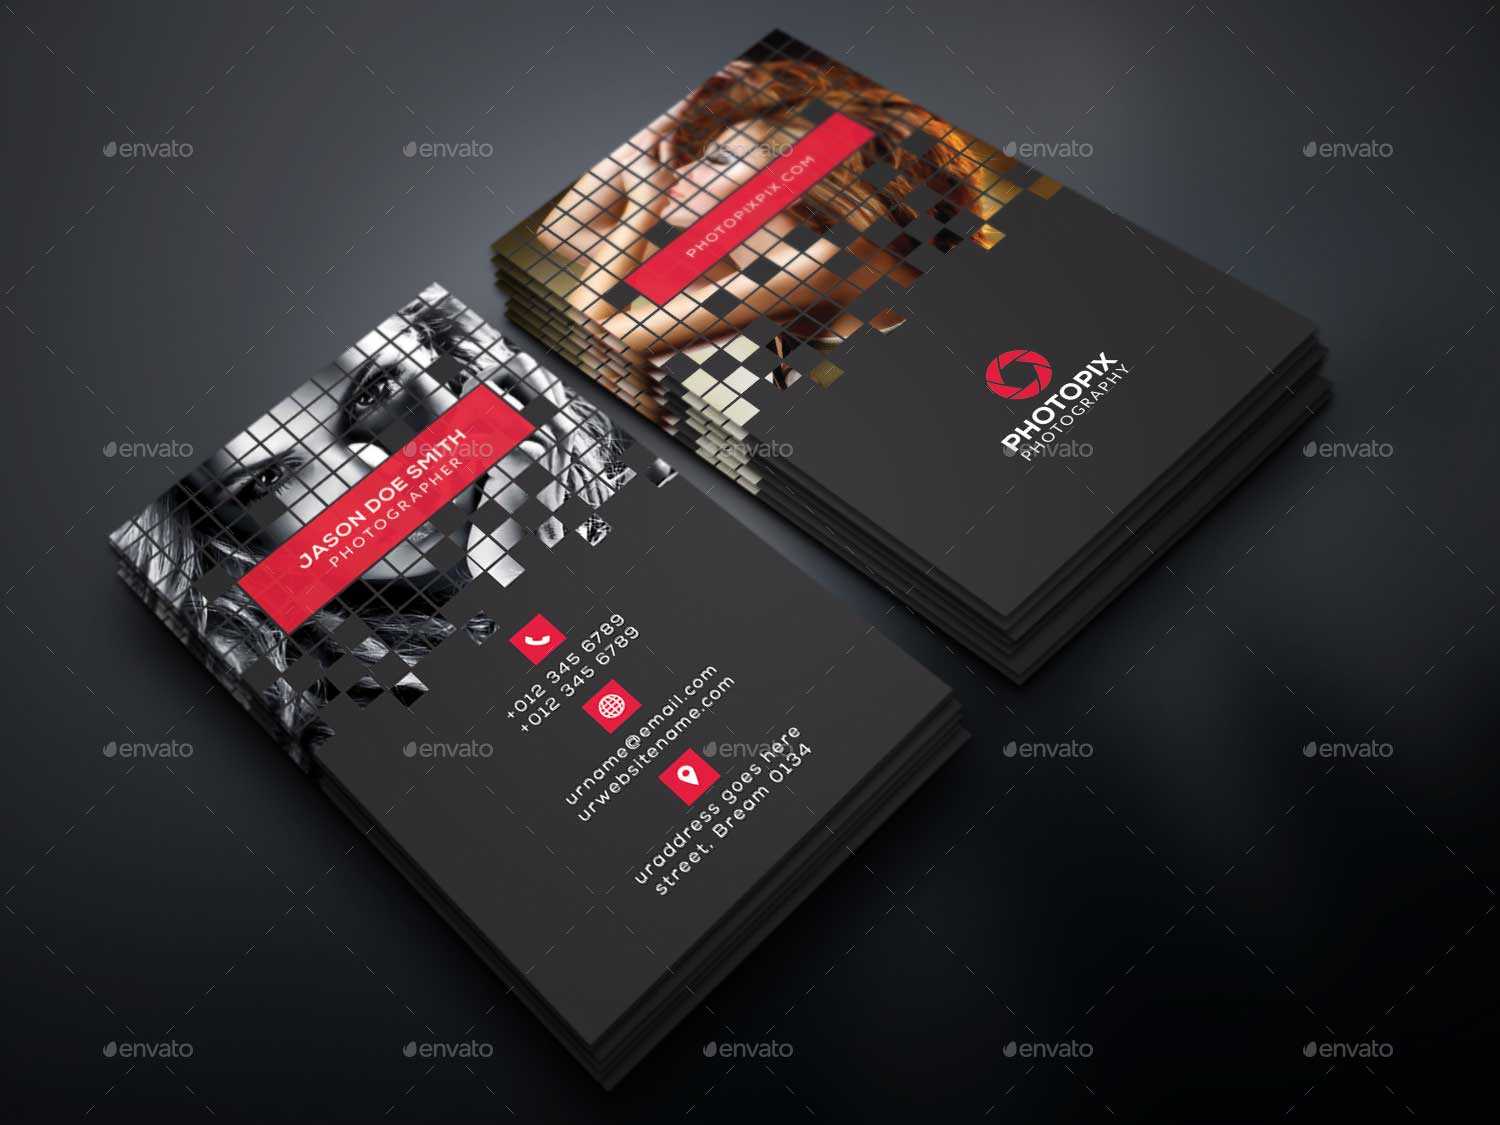 013 Template Ideas Pixel Photography Business Card With Photoshop Cs6 Business Card Template